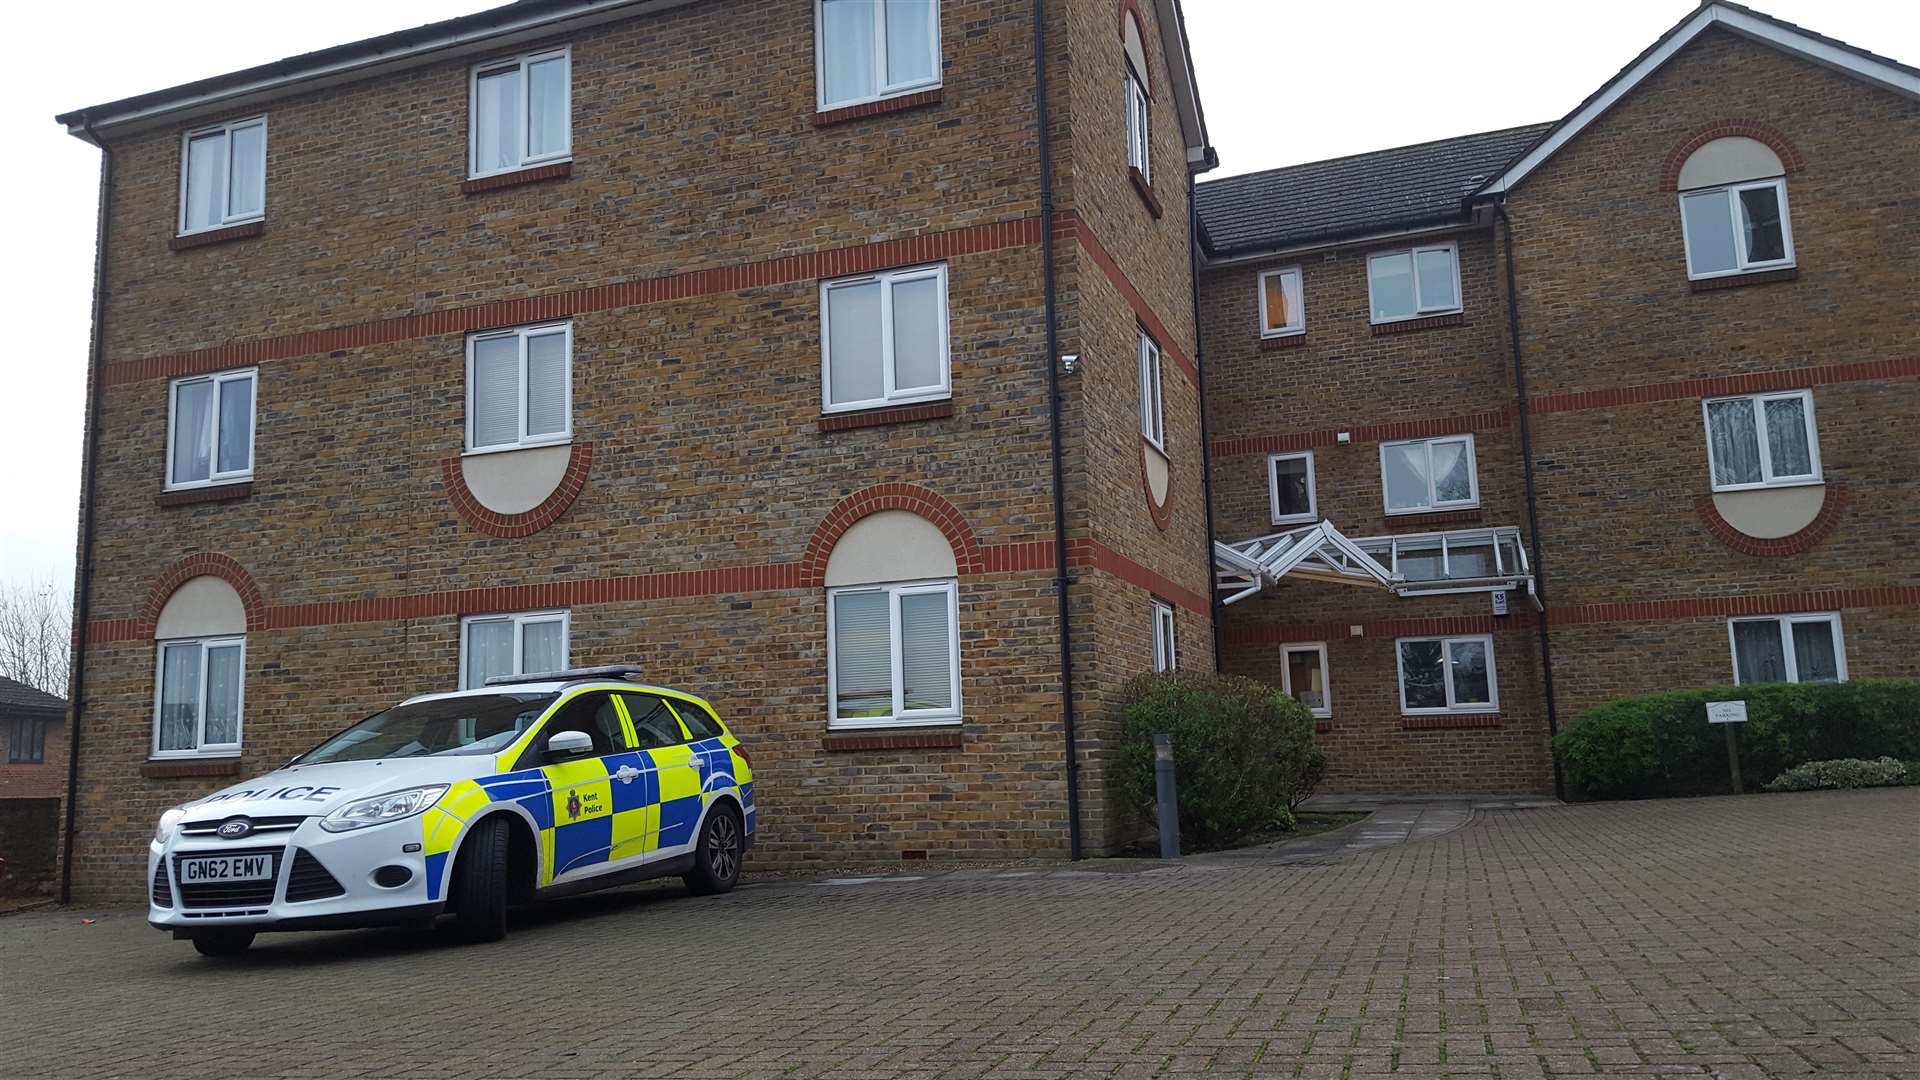 Police are at the scene in Kentish Court, Maidstone (6208040)